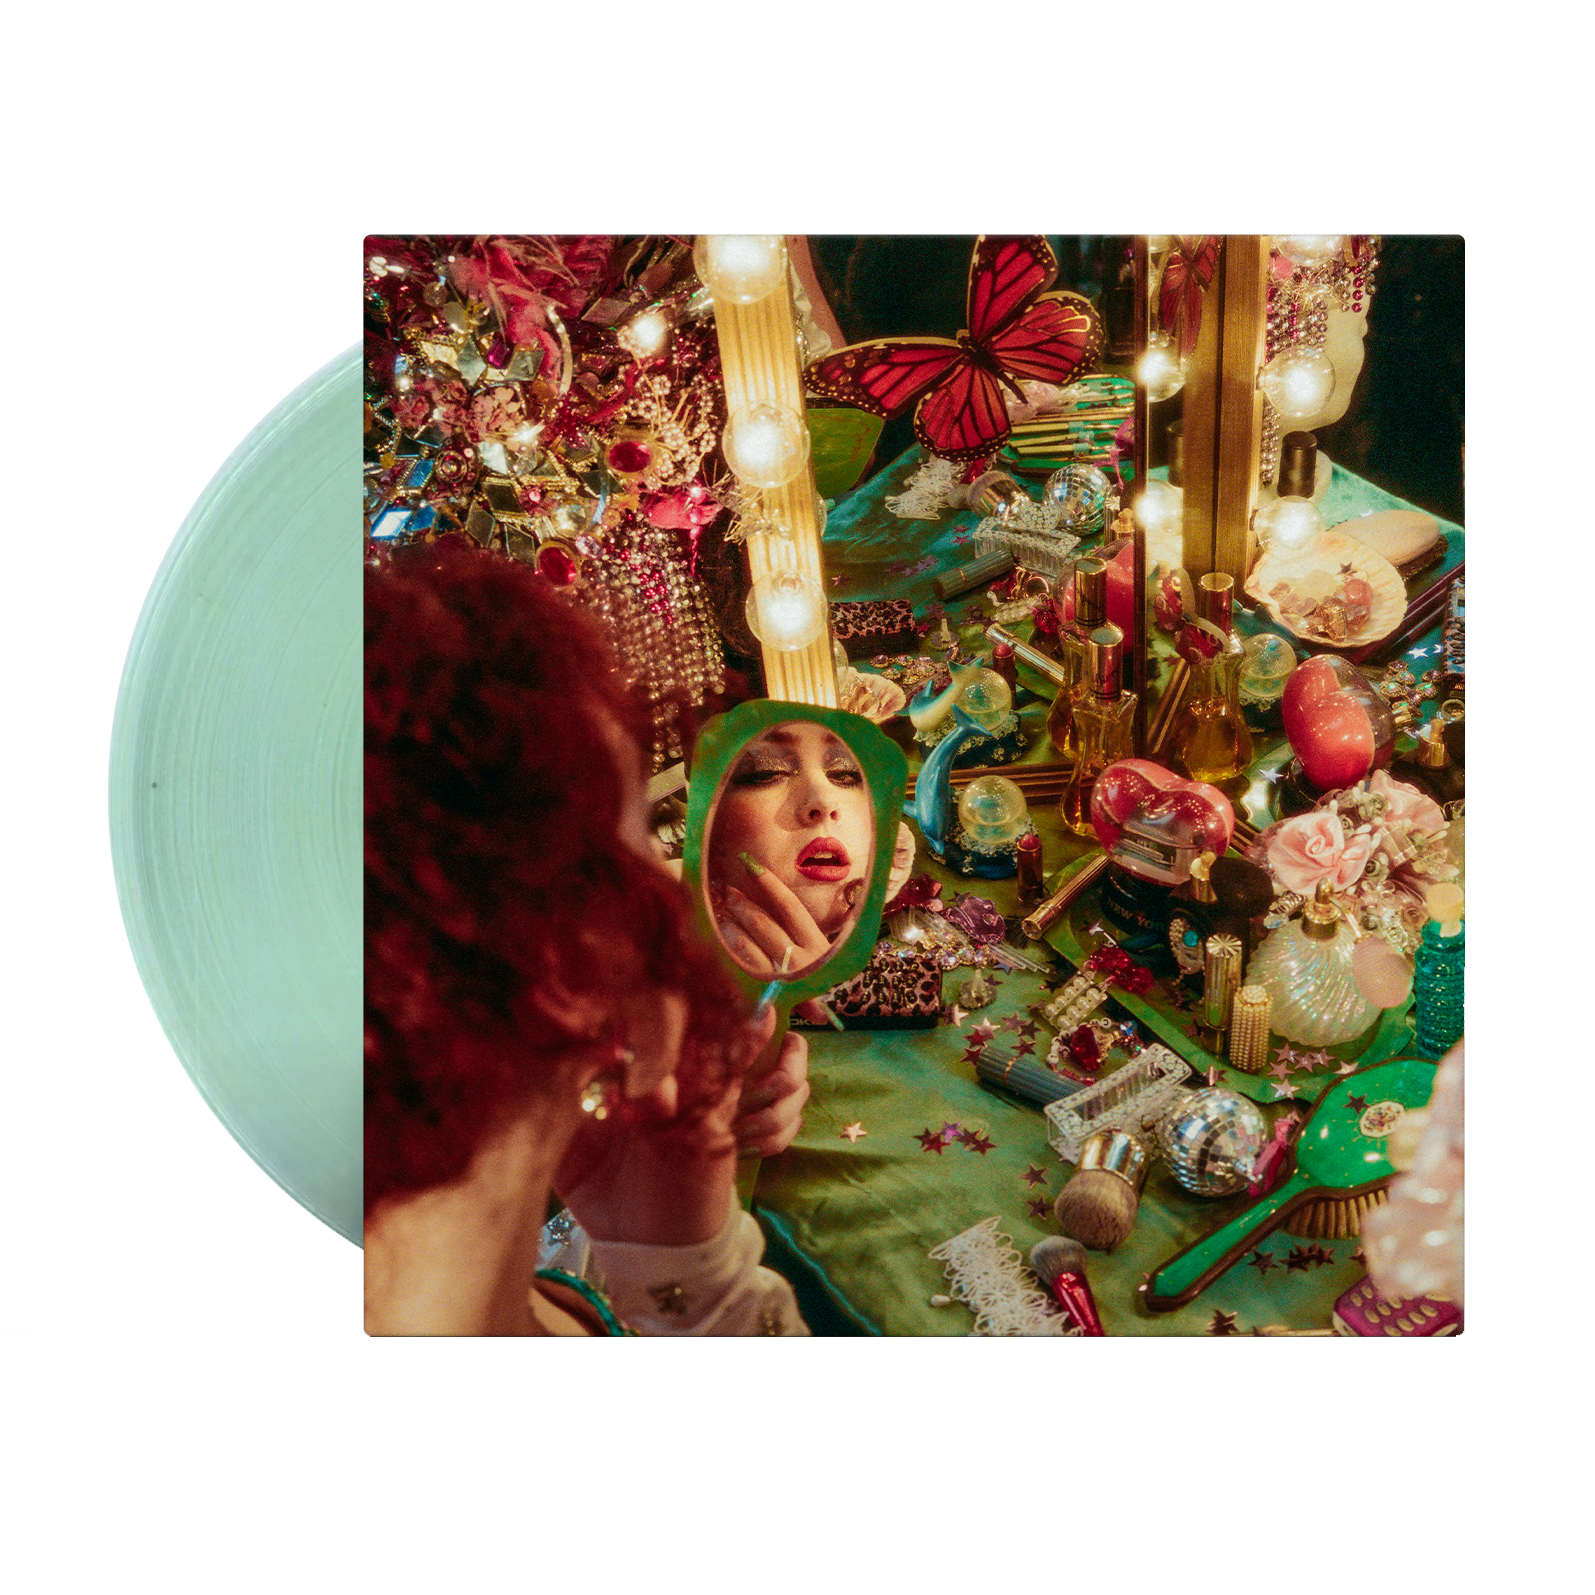 Chappell Roan - The Rise And Fall Of A Midwest Princess (Popstar Edition): Limited Coke Bottle Clear 2LP